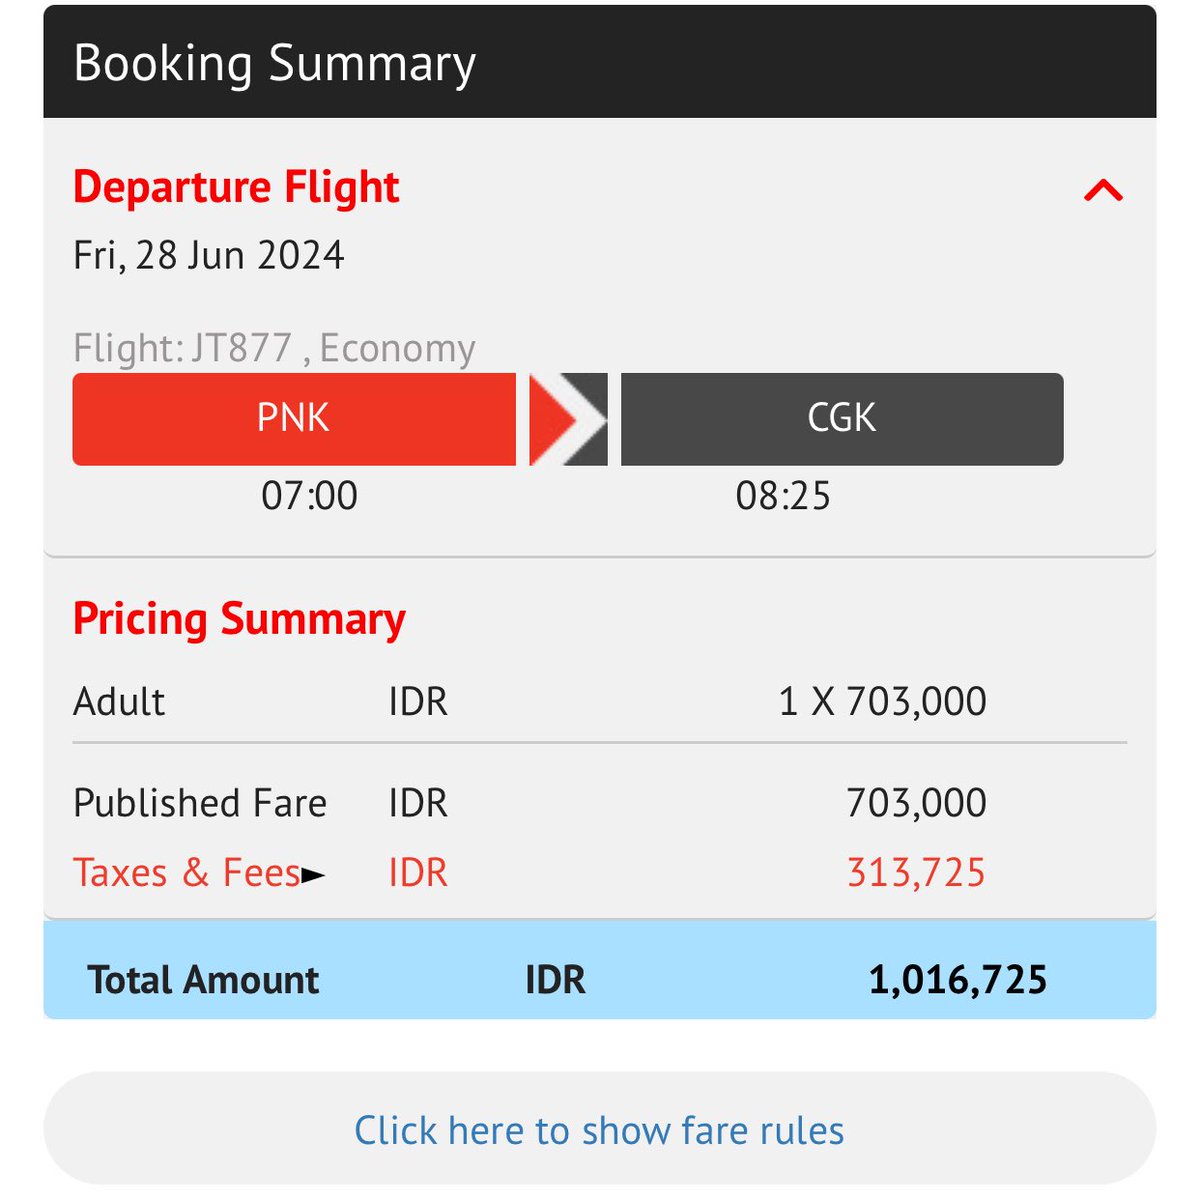 The Indo government done making warga Kalbar mad this time. They would rather fly to Jakarta through Kuching because the fare is cheaper.

Left: AirAsia Indo (QZ) KCH - CGK (MYR174.00 = IDR591,784)

Right: Lion Air Indo (JT) PNK - CGK (IDR1,016,725 = MYR298.00)